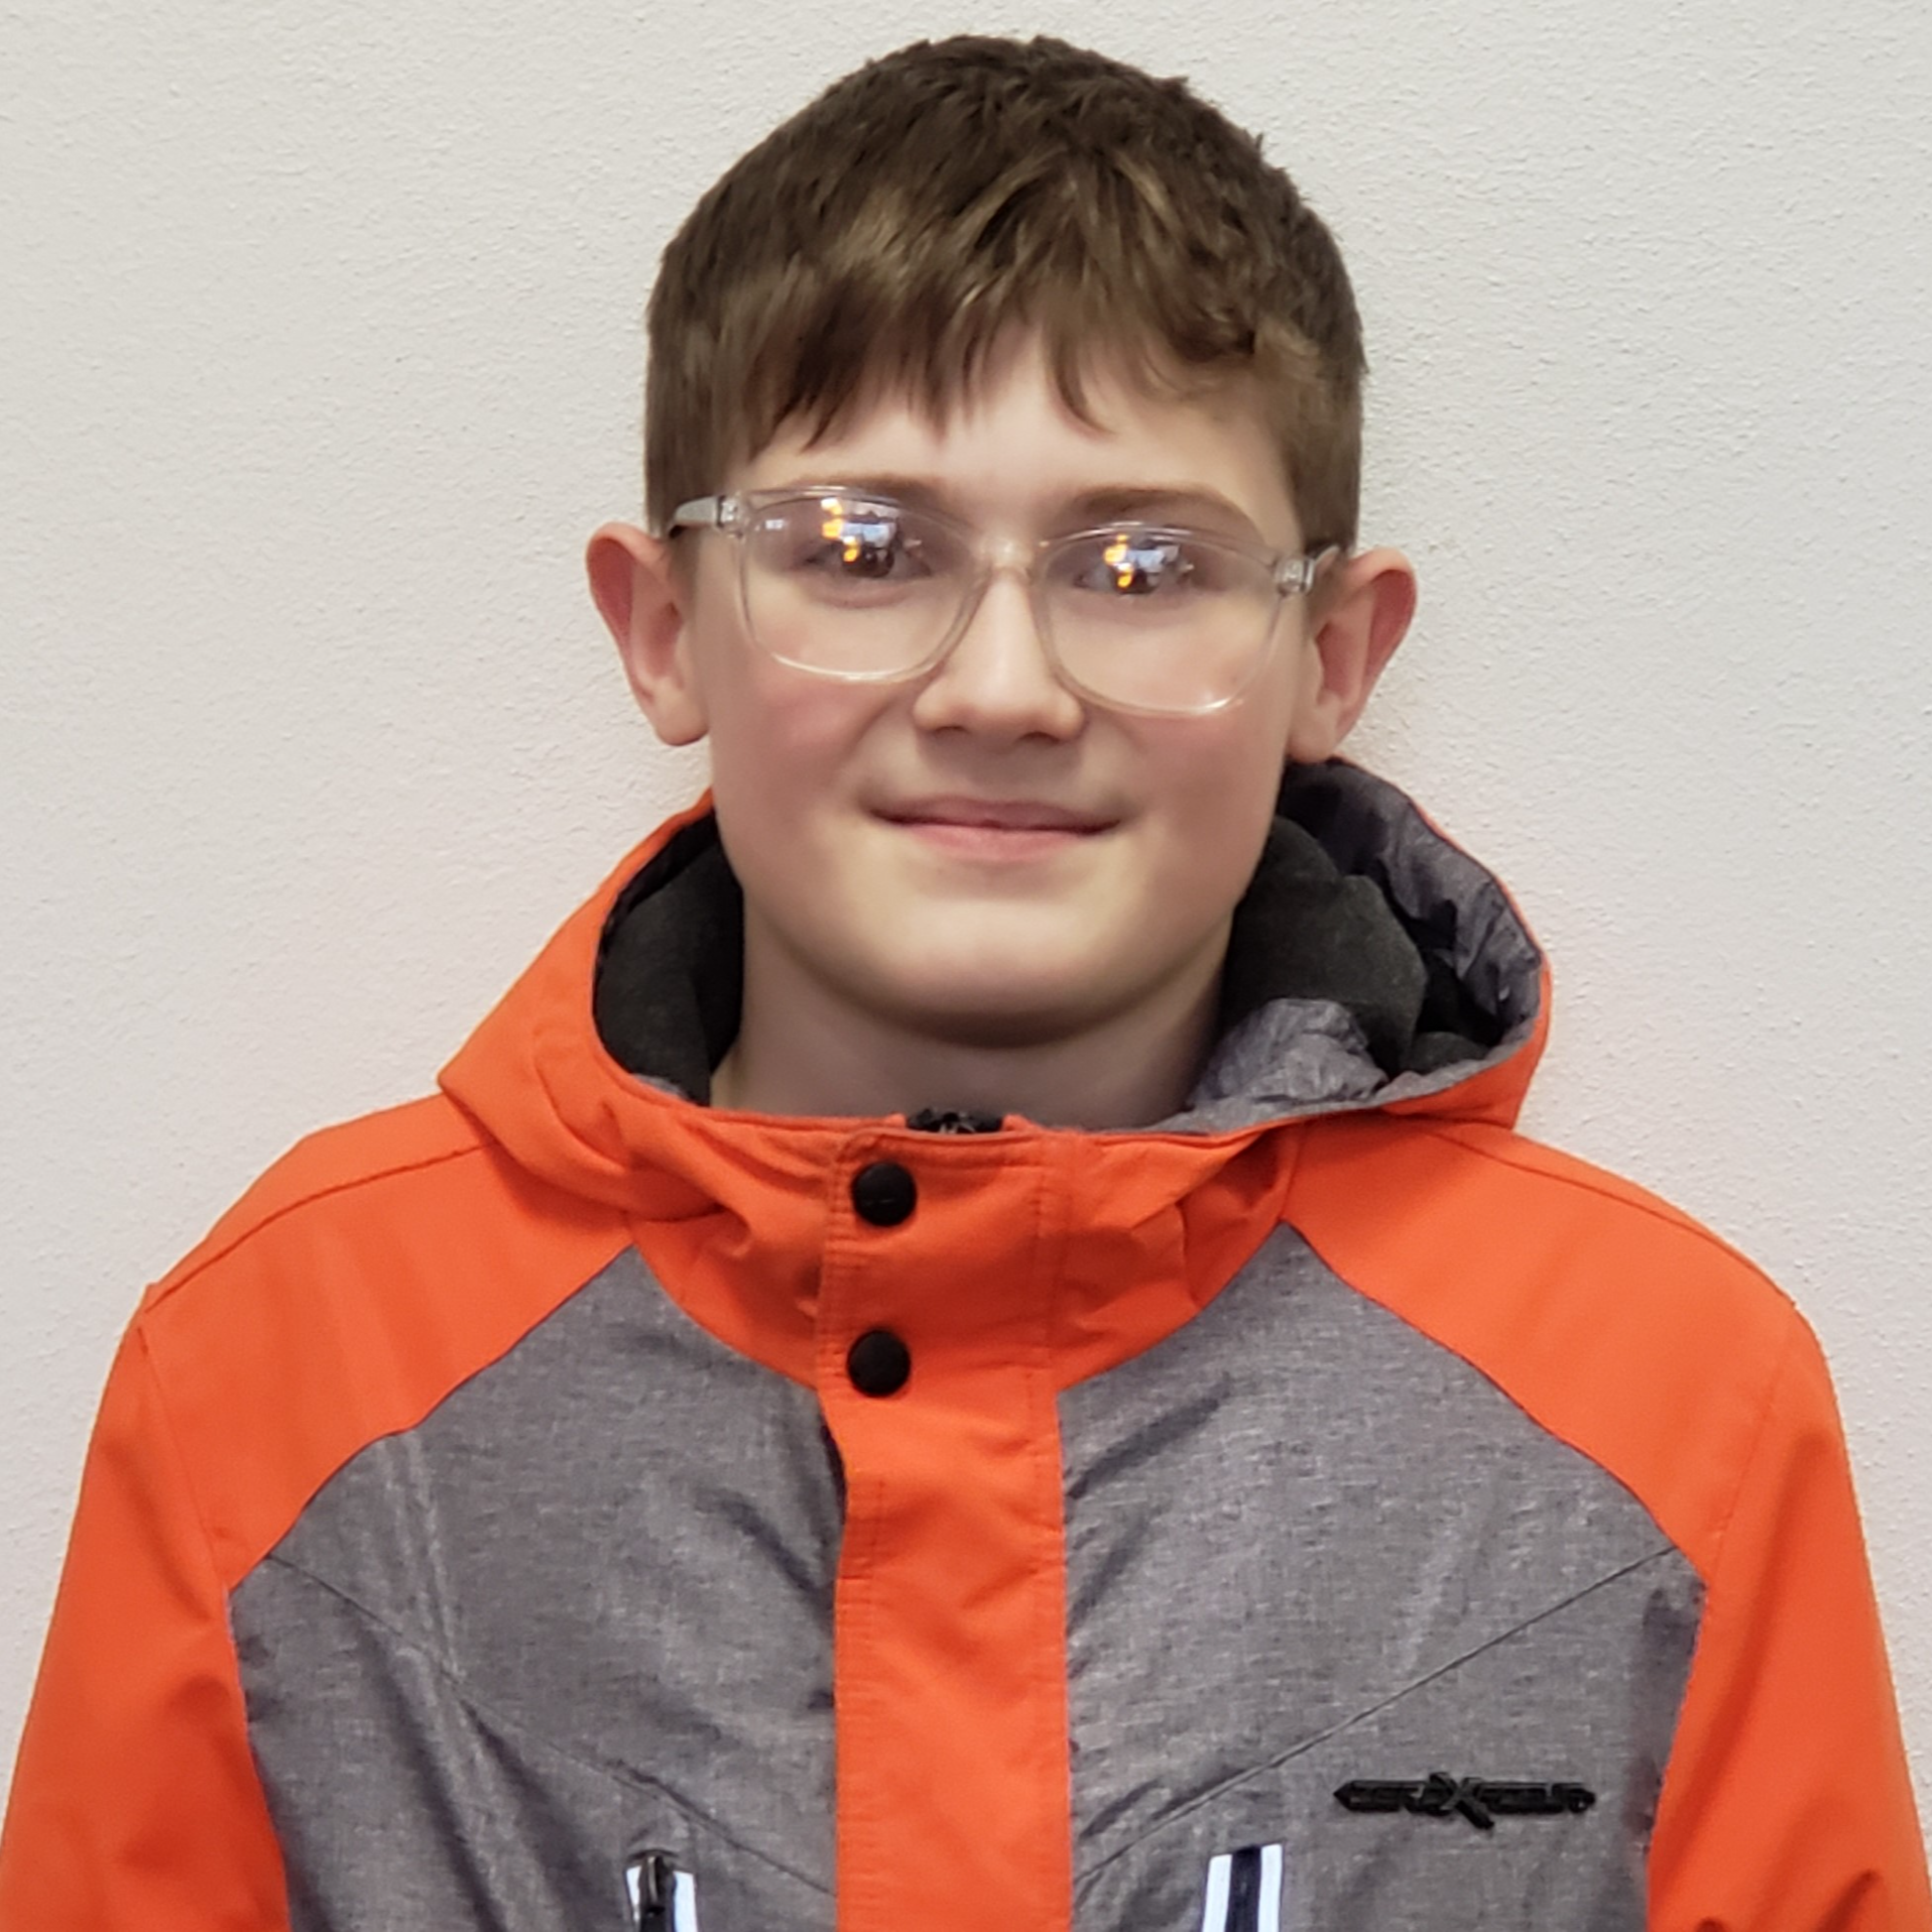 boy with light-brown hair wearing clear-rimmed glasses and a gray-&-orange jacket with a hood